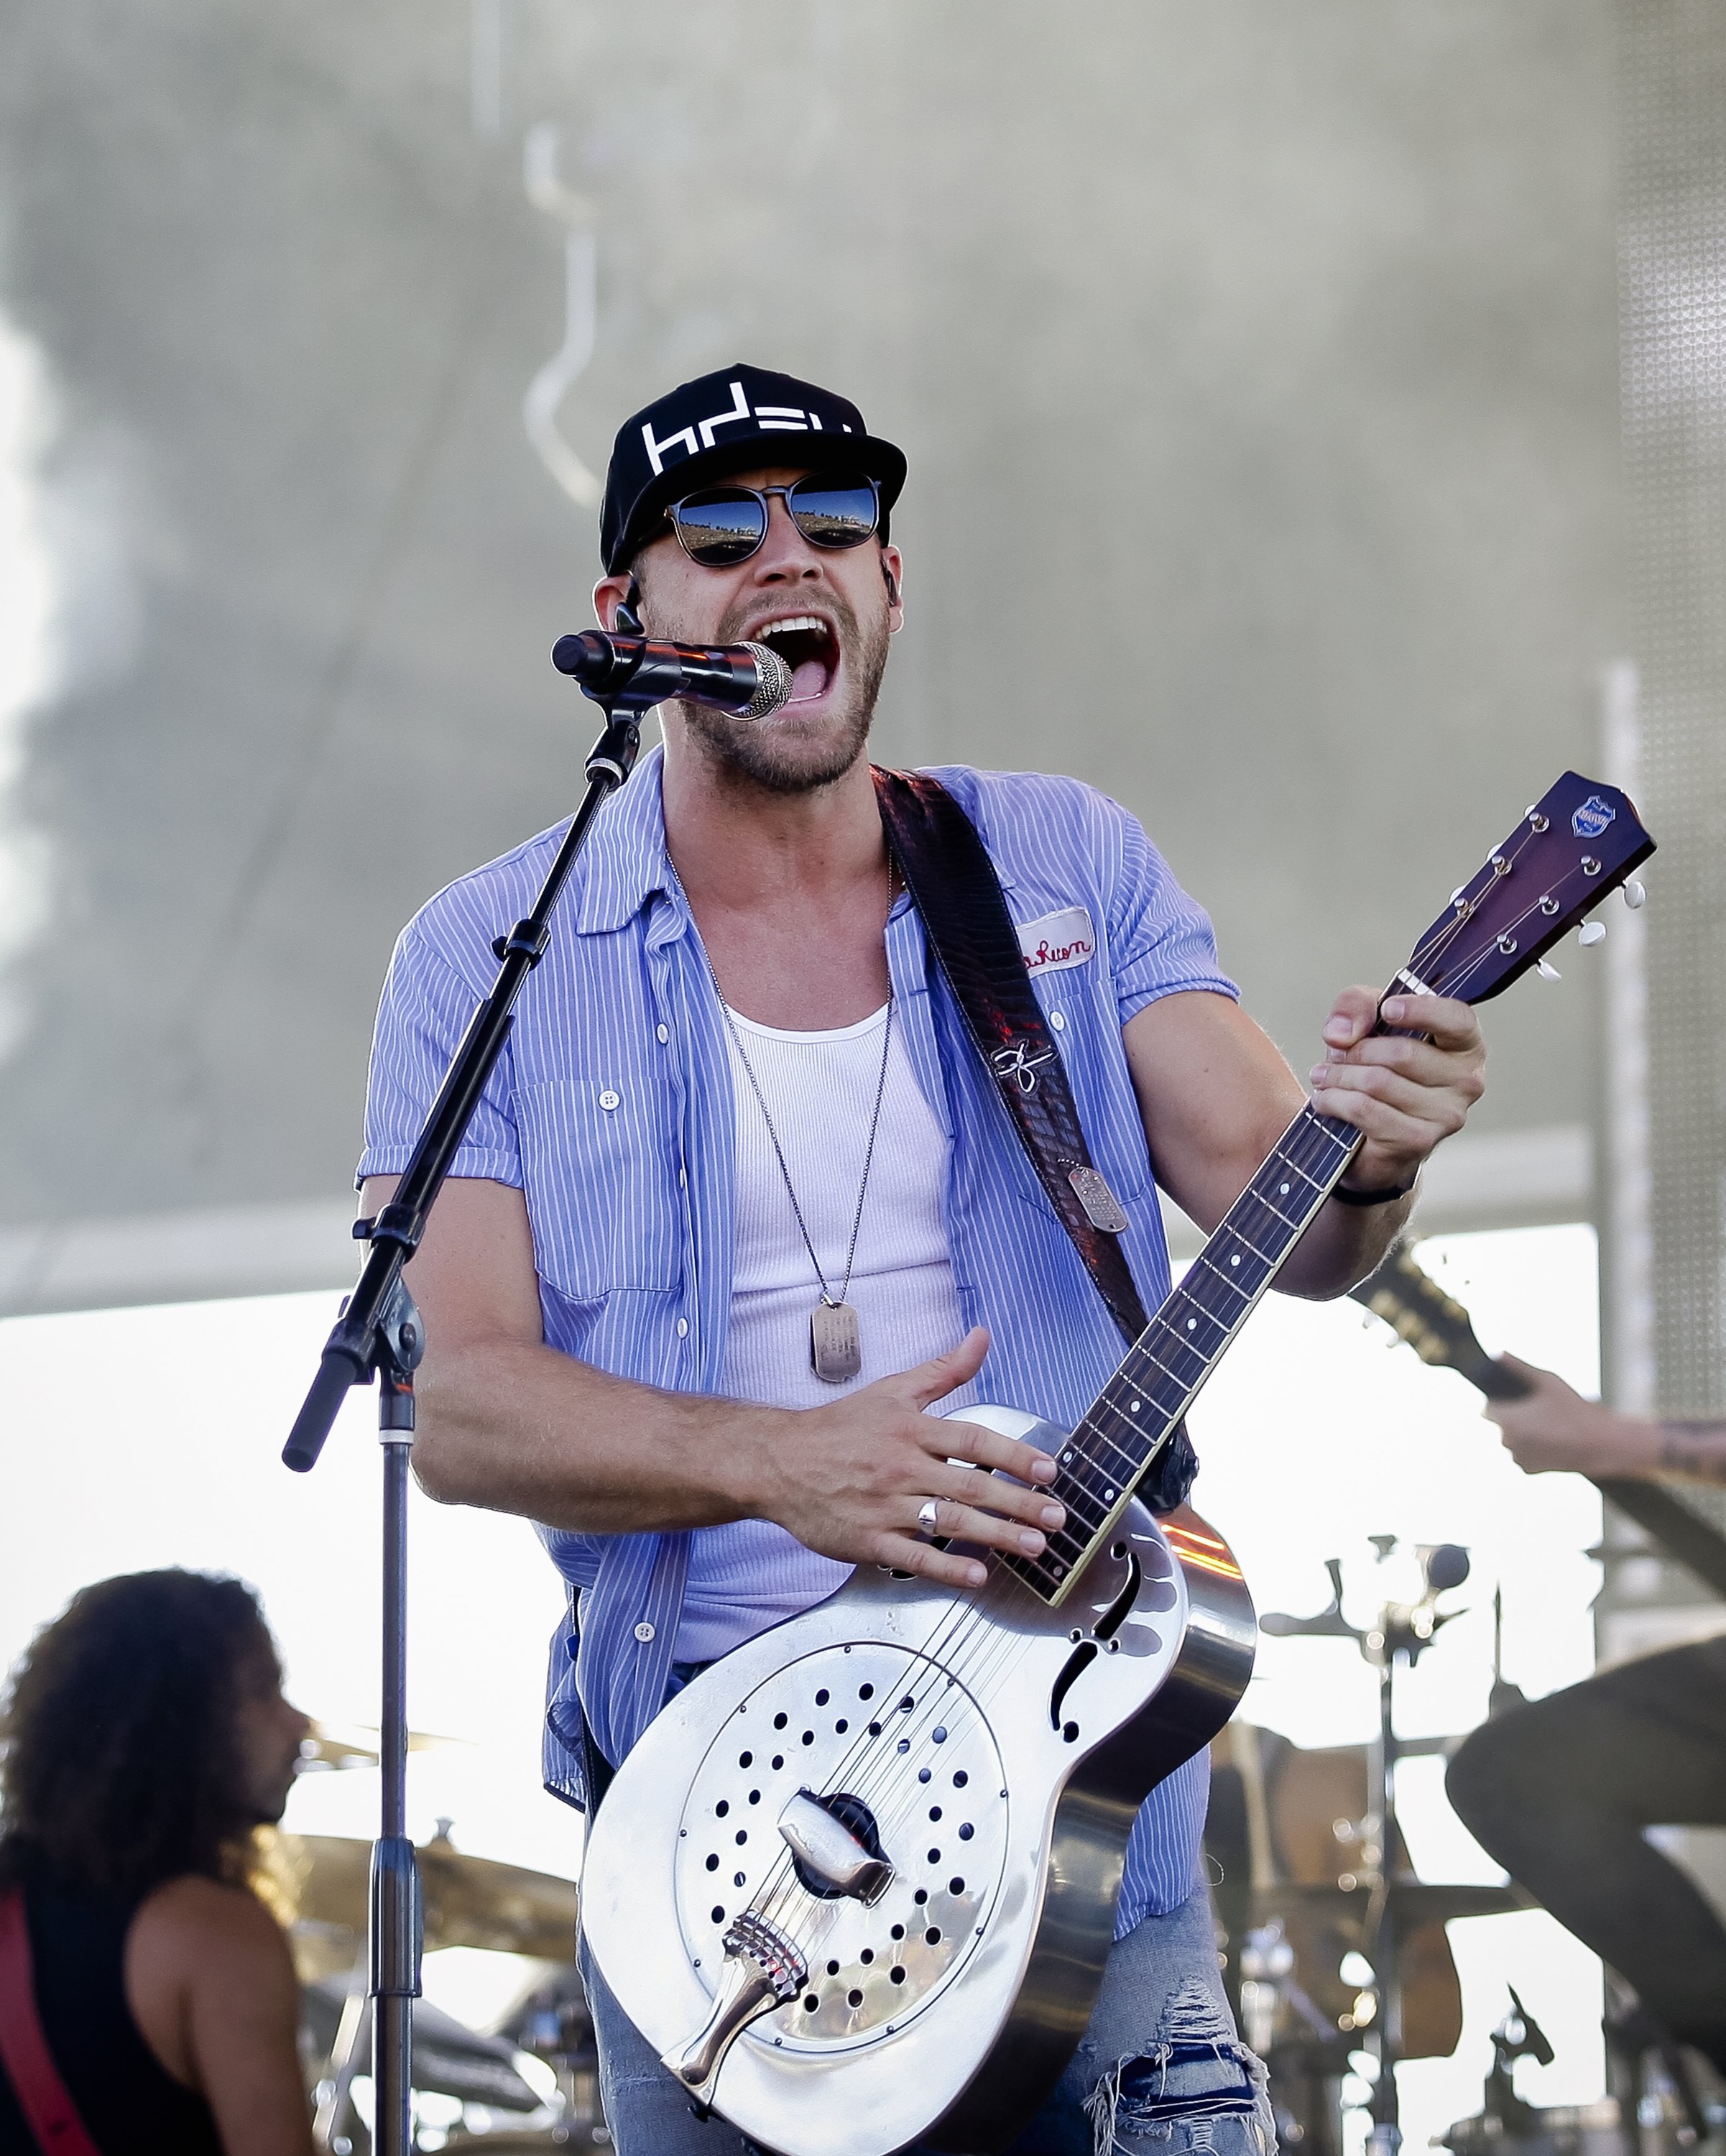 Chase Rice performs at the Watershed Music Festival in George, Washington on July 29, 2017 | Photo: Getty Images